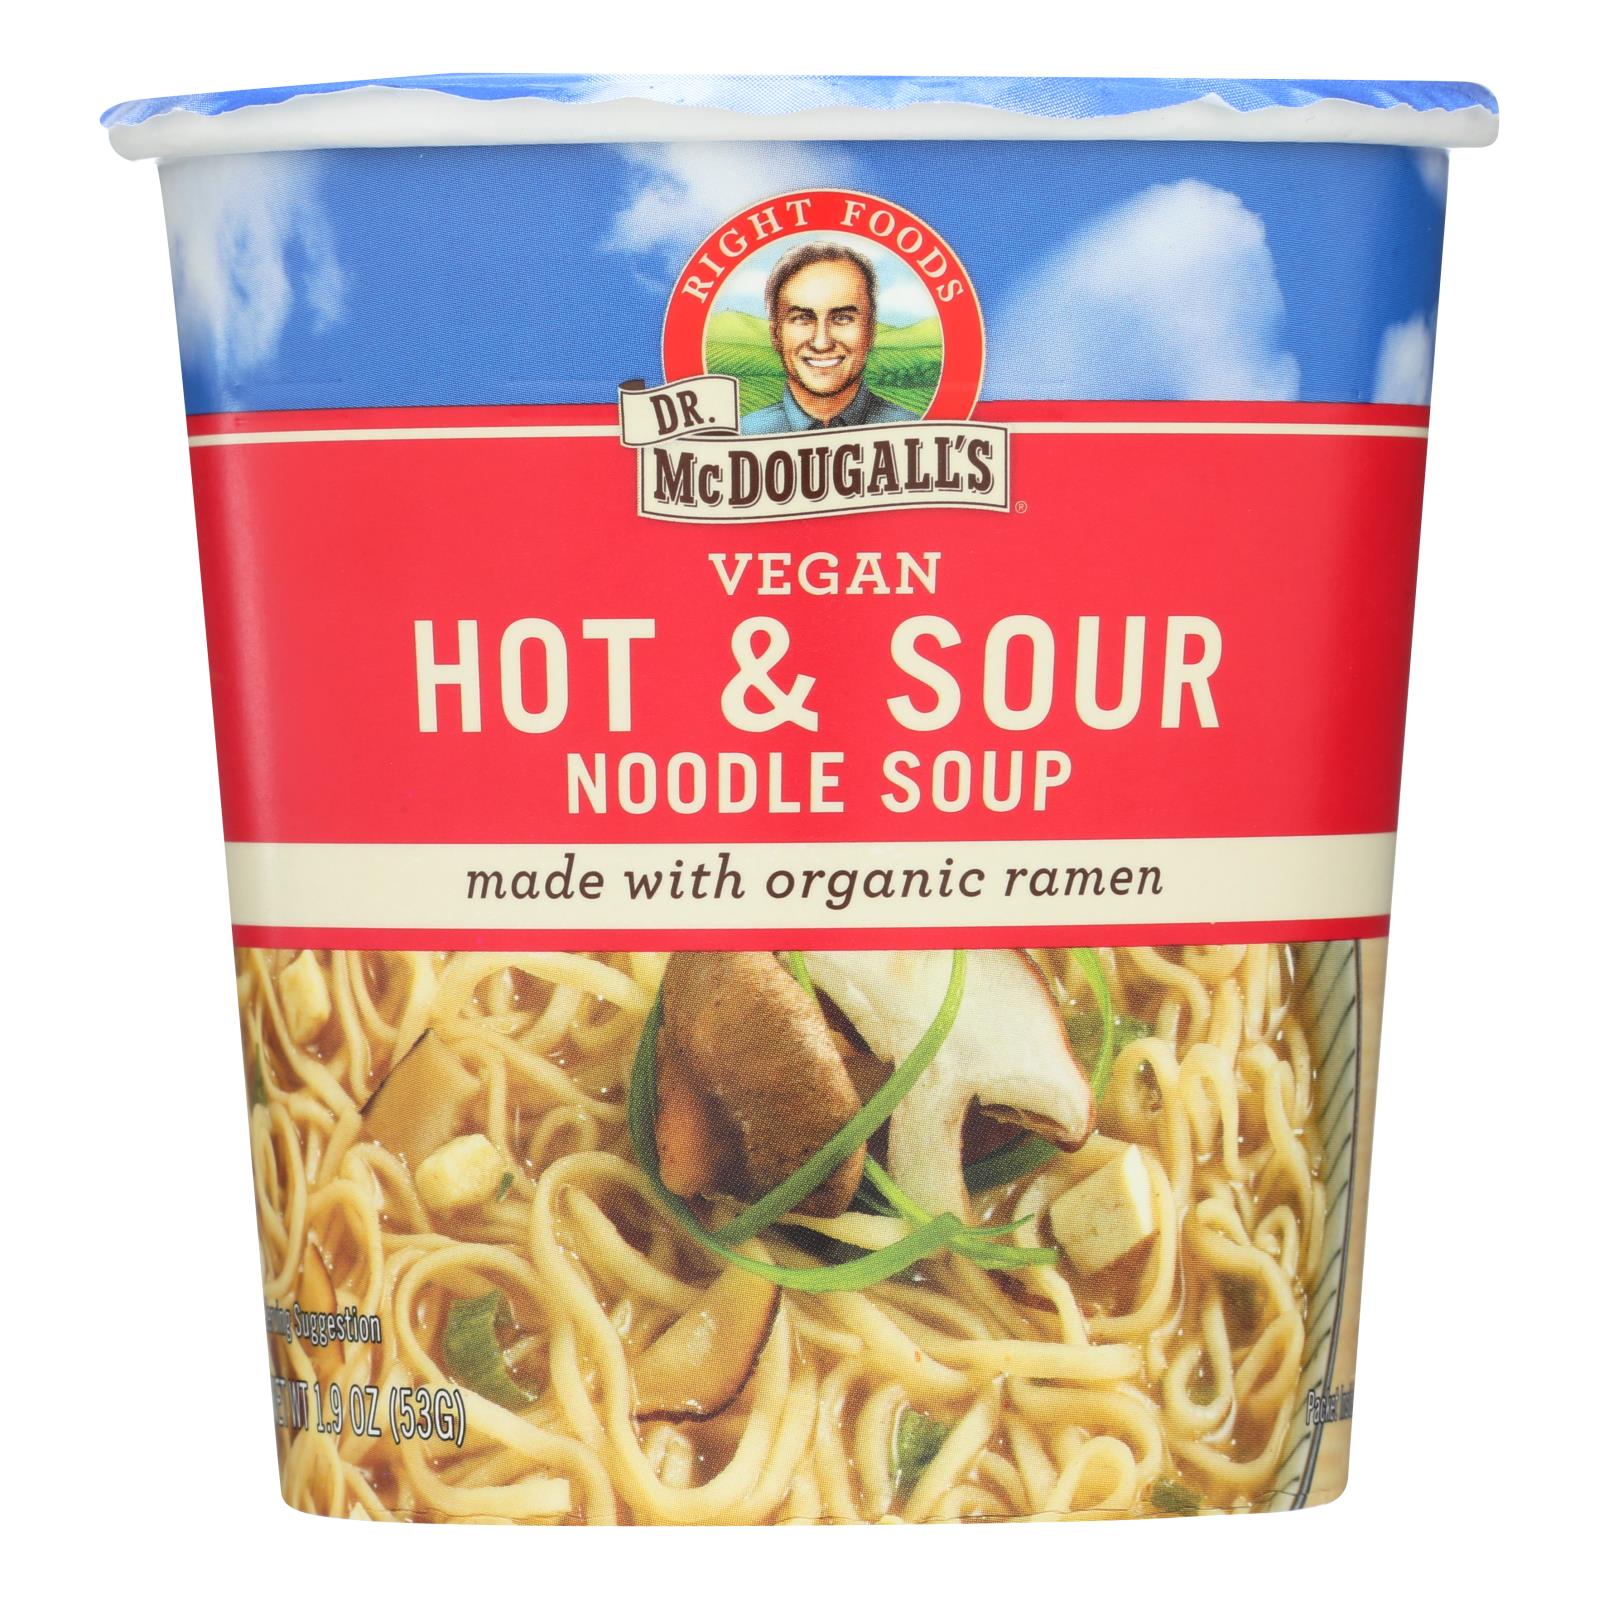 Dr. Mcdougall's Vegan Hot And Sour Noodle Soup Big Cup - Case Of 6 - 1.9 Oz. - Whole Green Foods